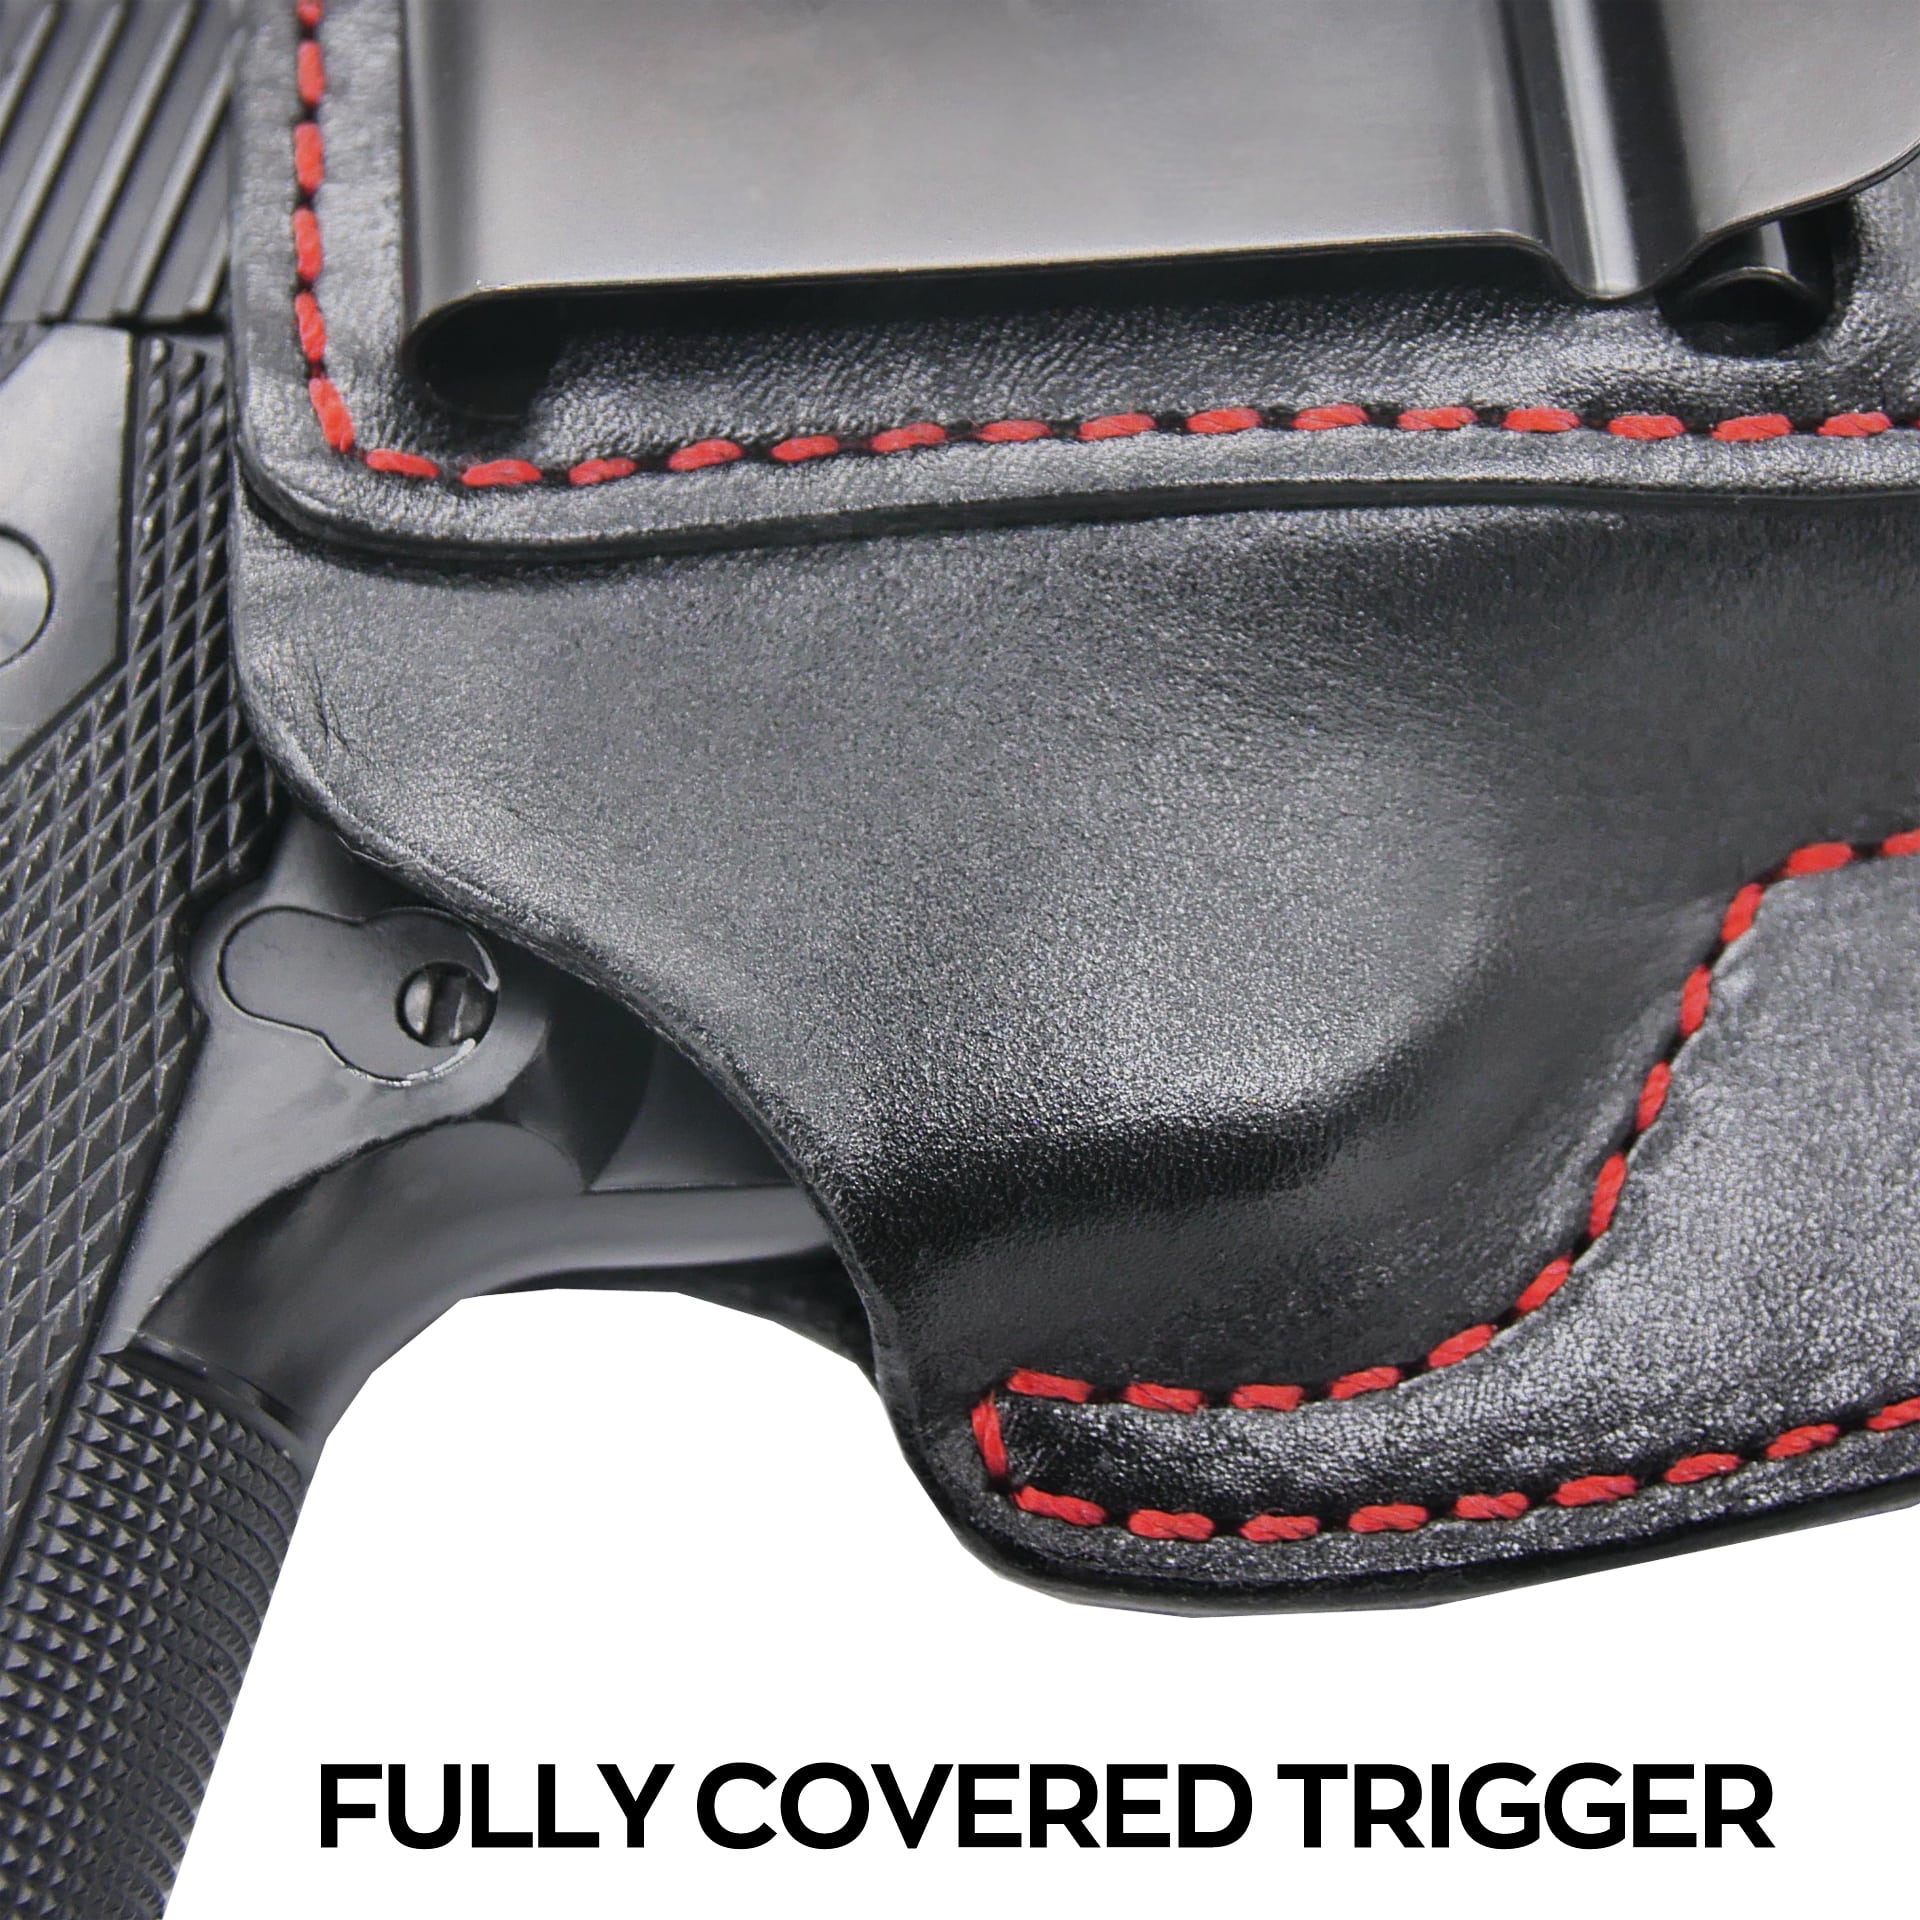 Ktactical IWB Leather Holster for 1911 5 Inch Barrel CCW (Colt/Kimber/Springfield)